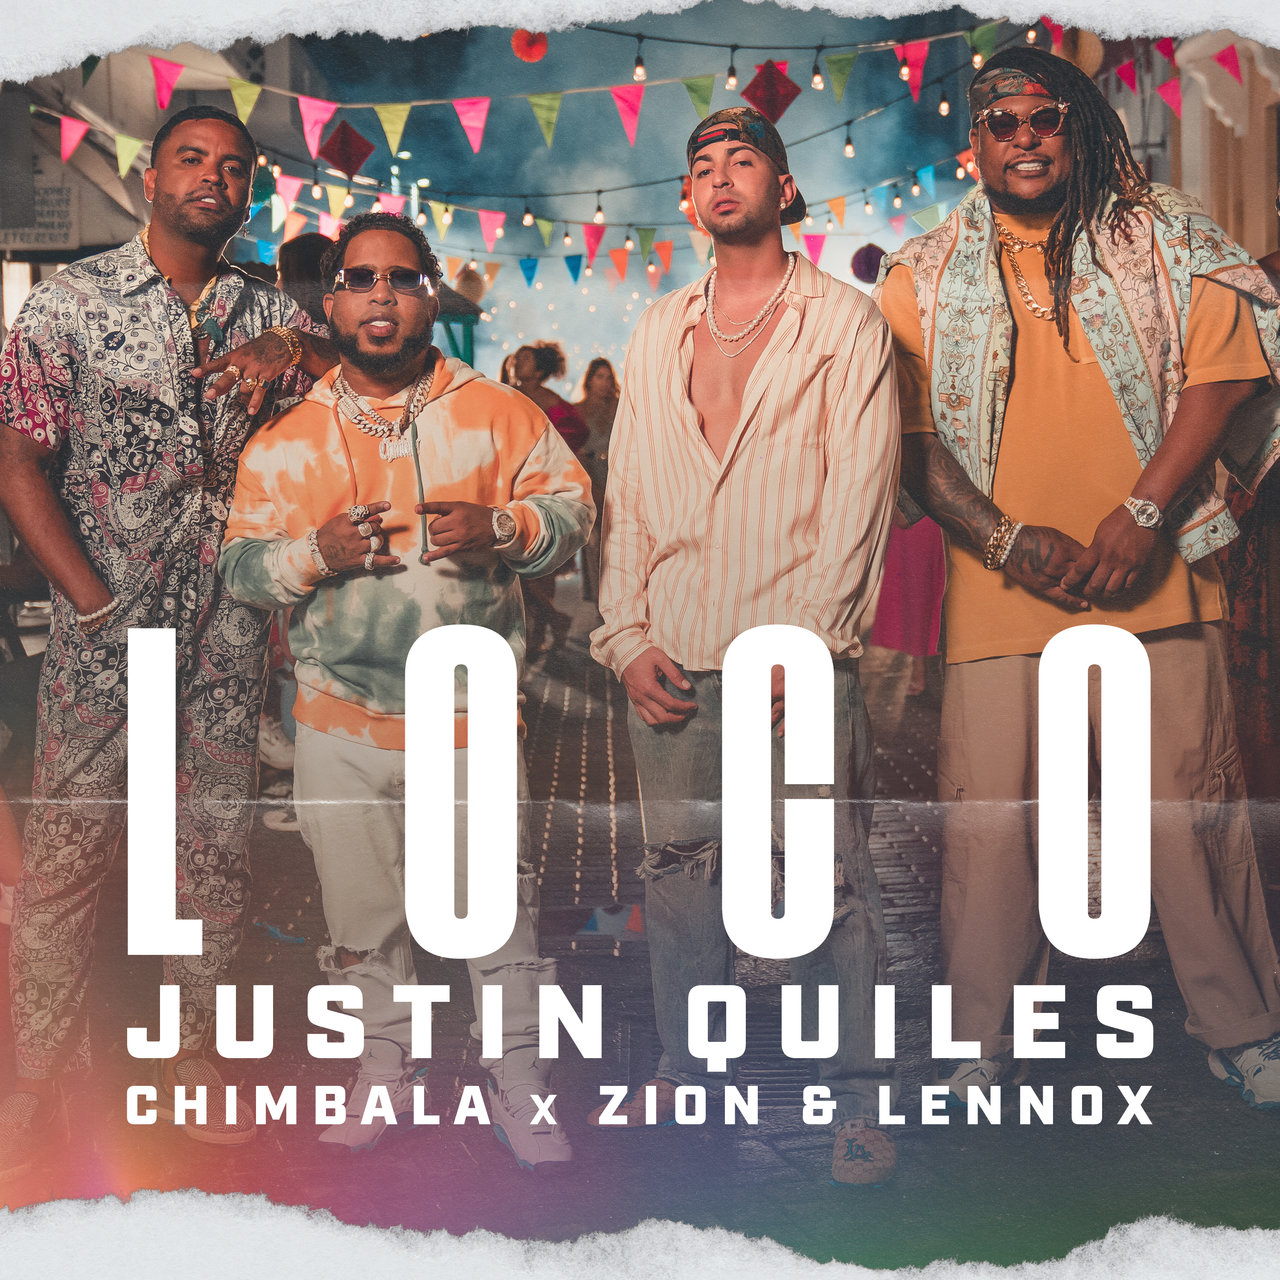 Justin Quiles - Loco (ft. Chimbala, Zion and Lennox) (Cover)